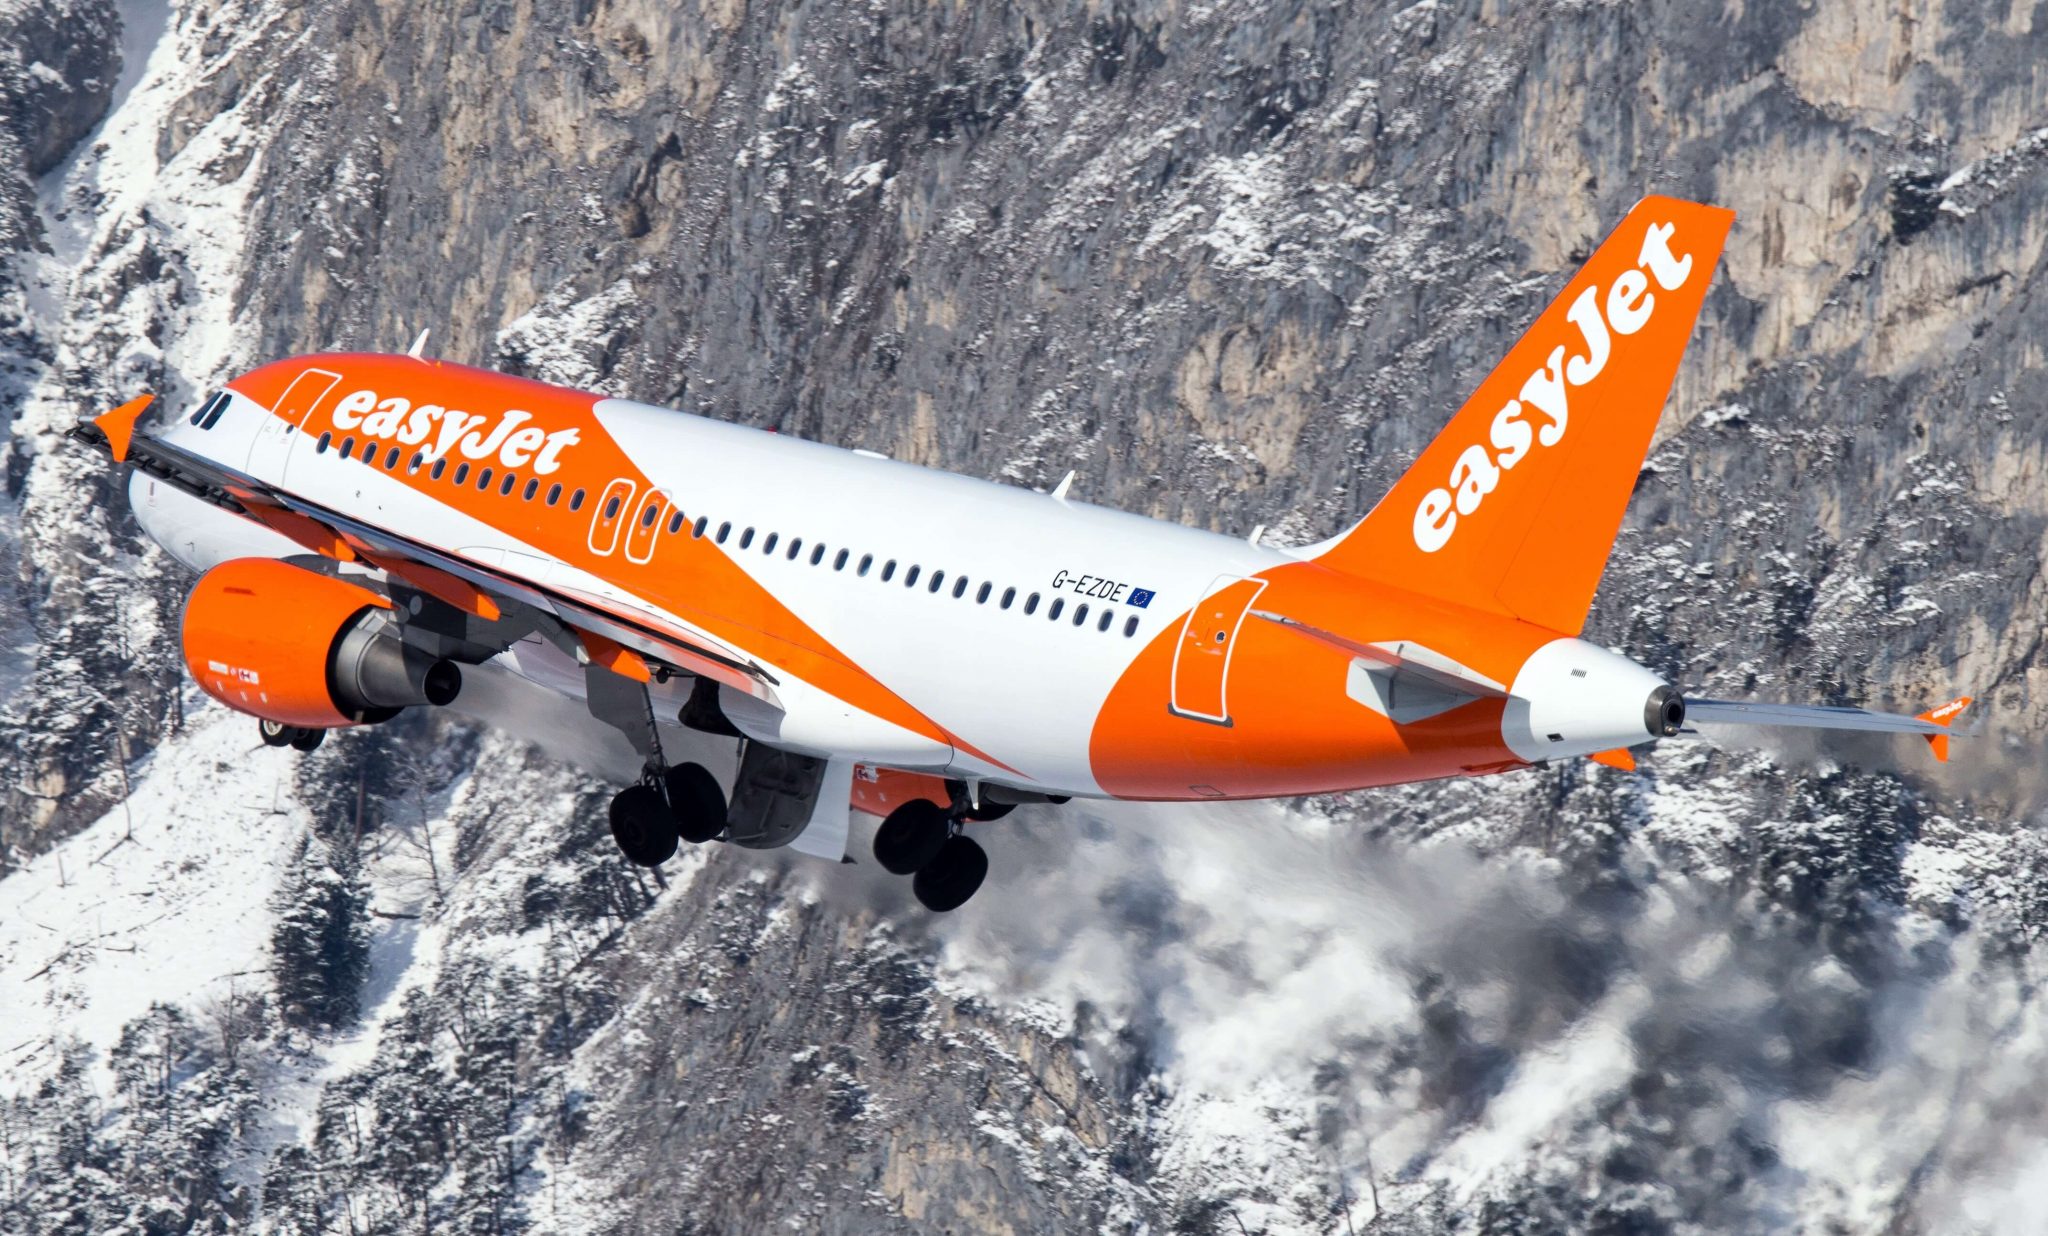 easyJet to add five new aircraft across Malaga, Palma and Faro bases in 2022